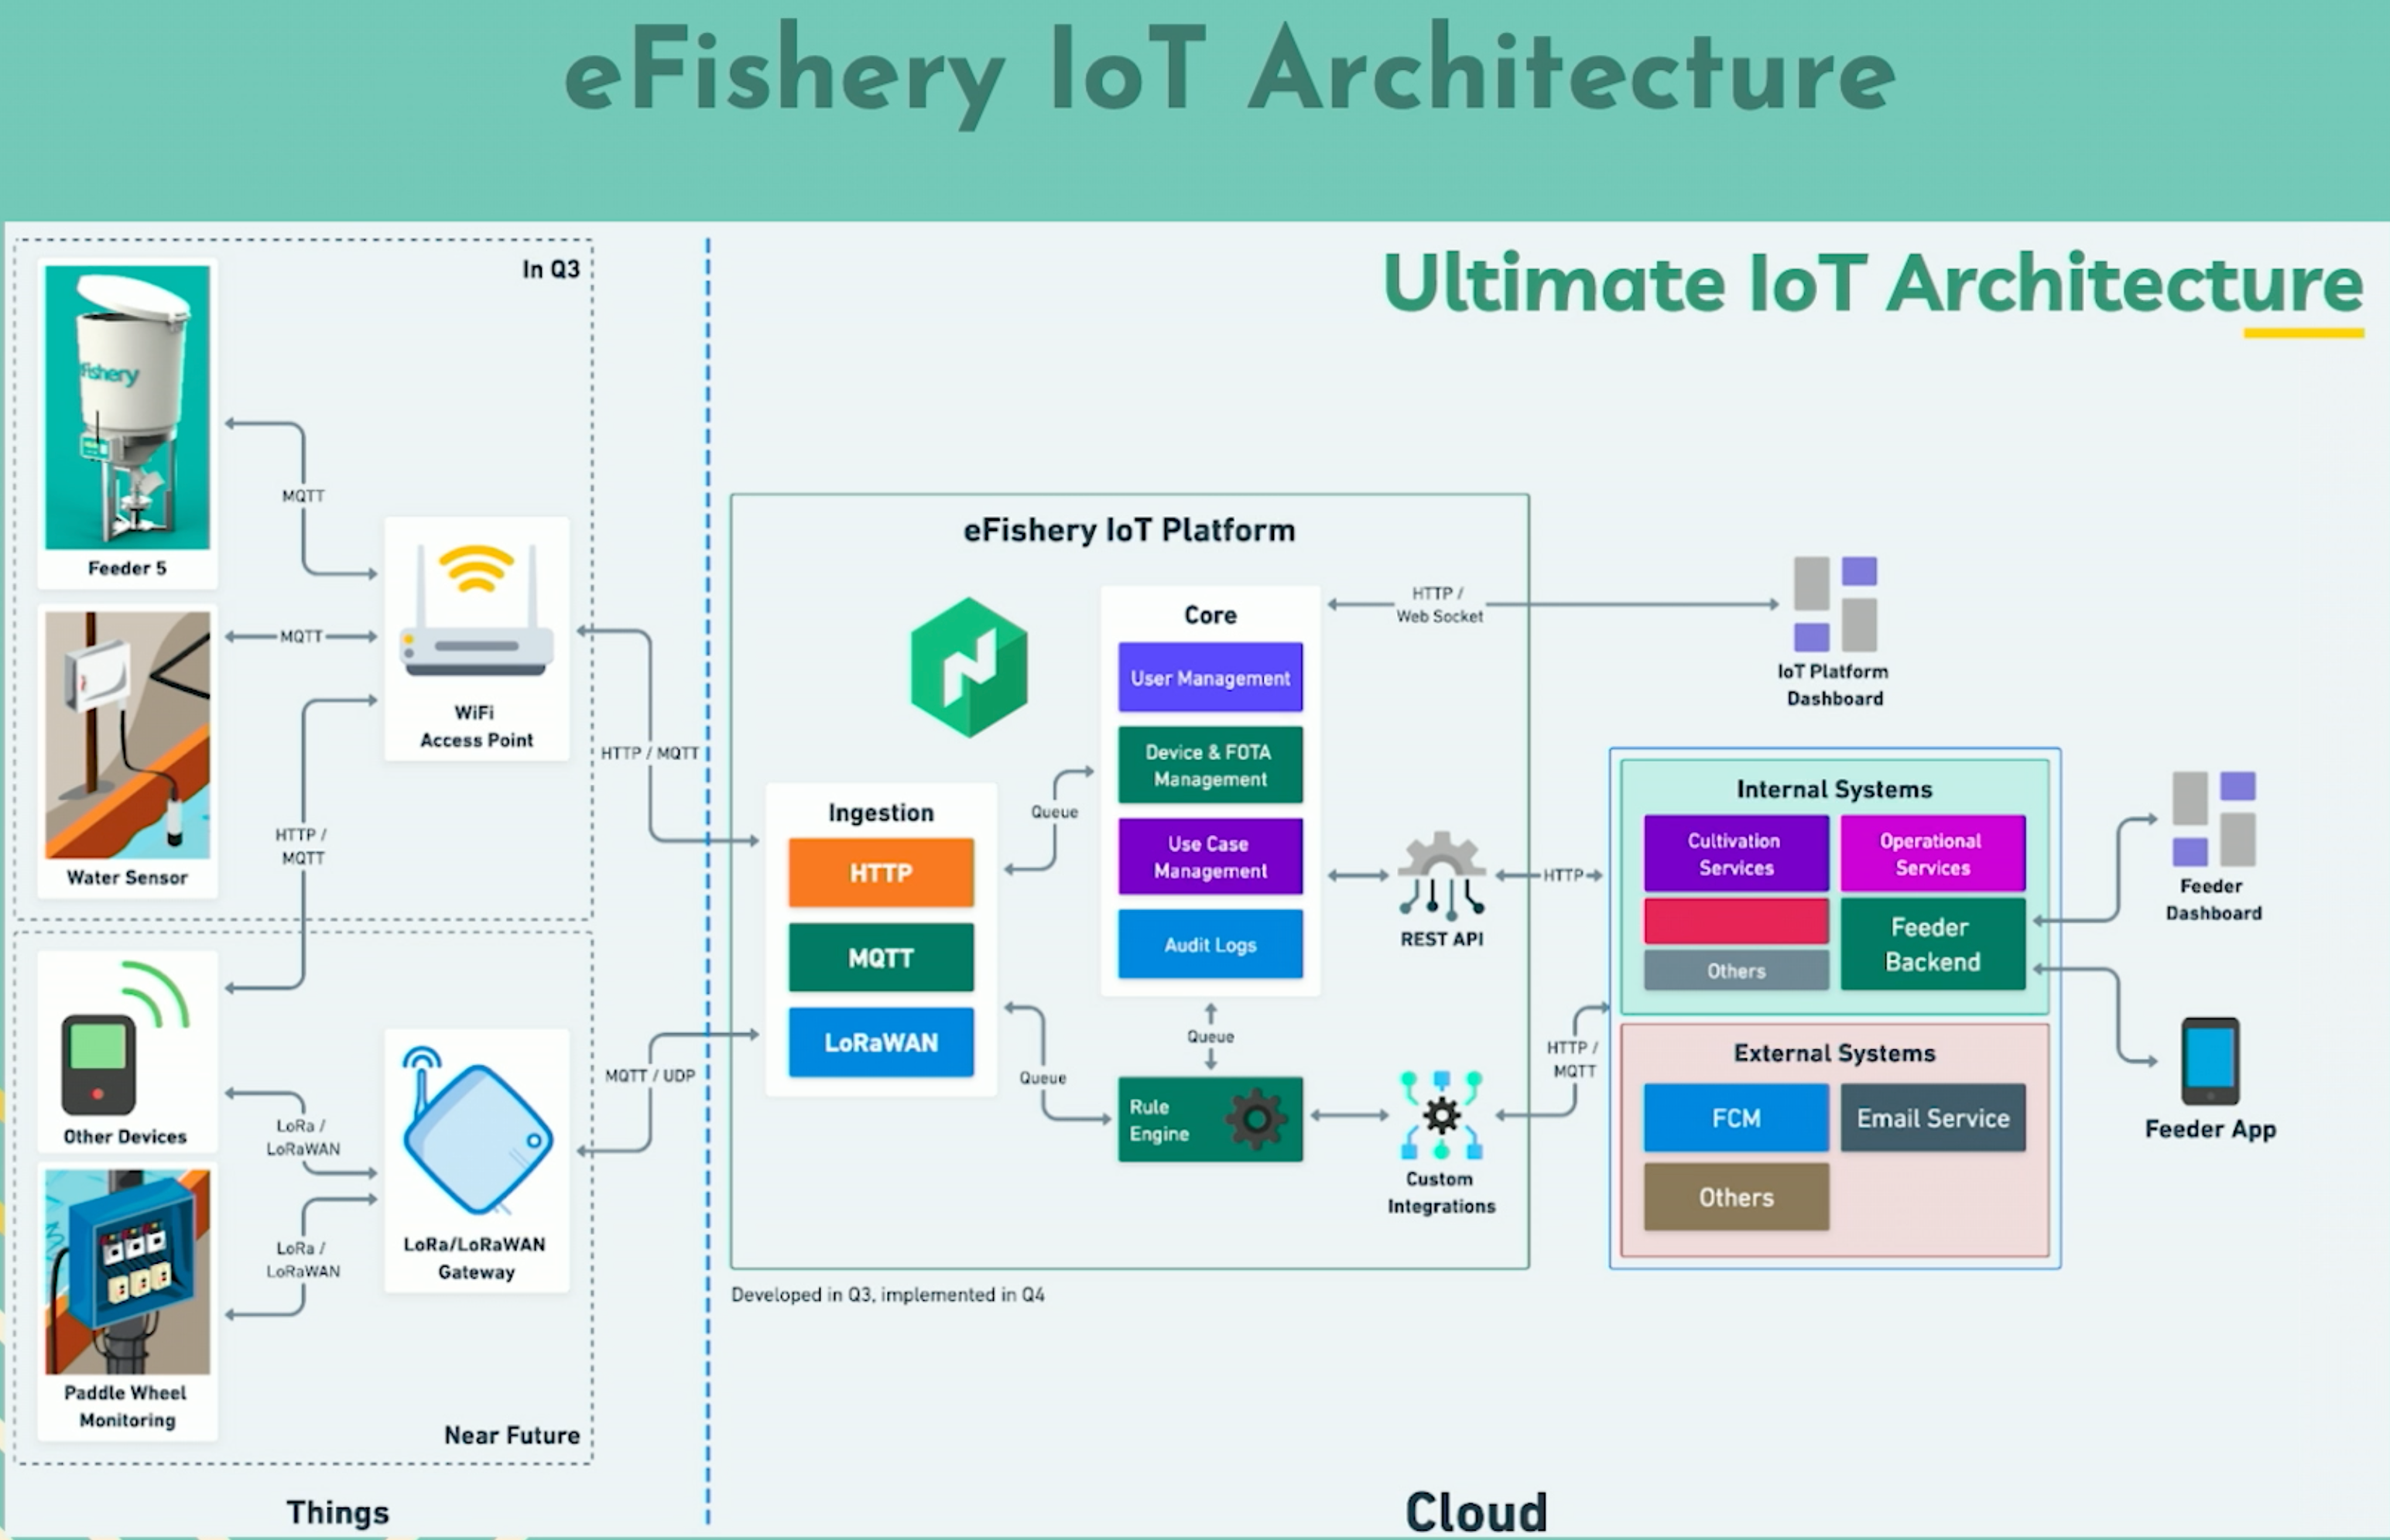 efishery's IoT architecture